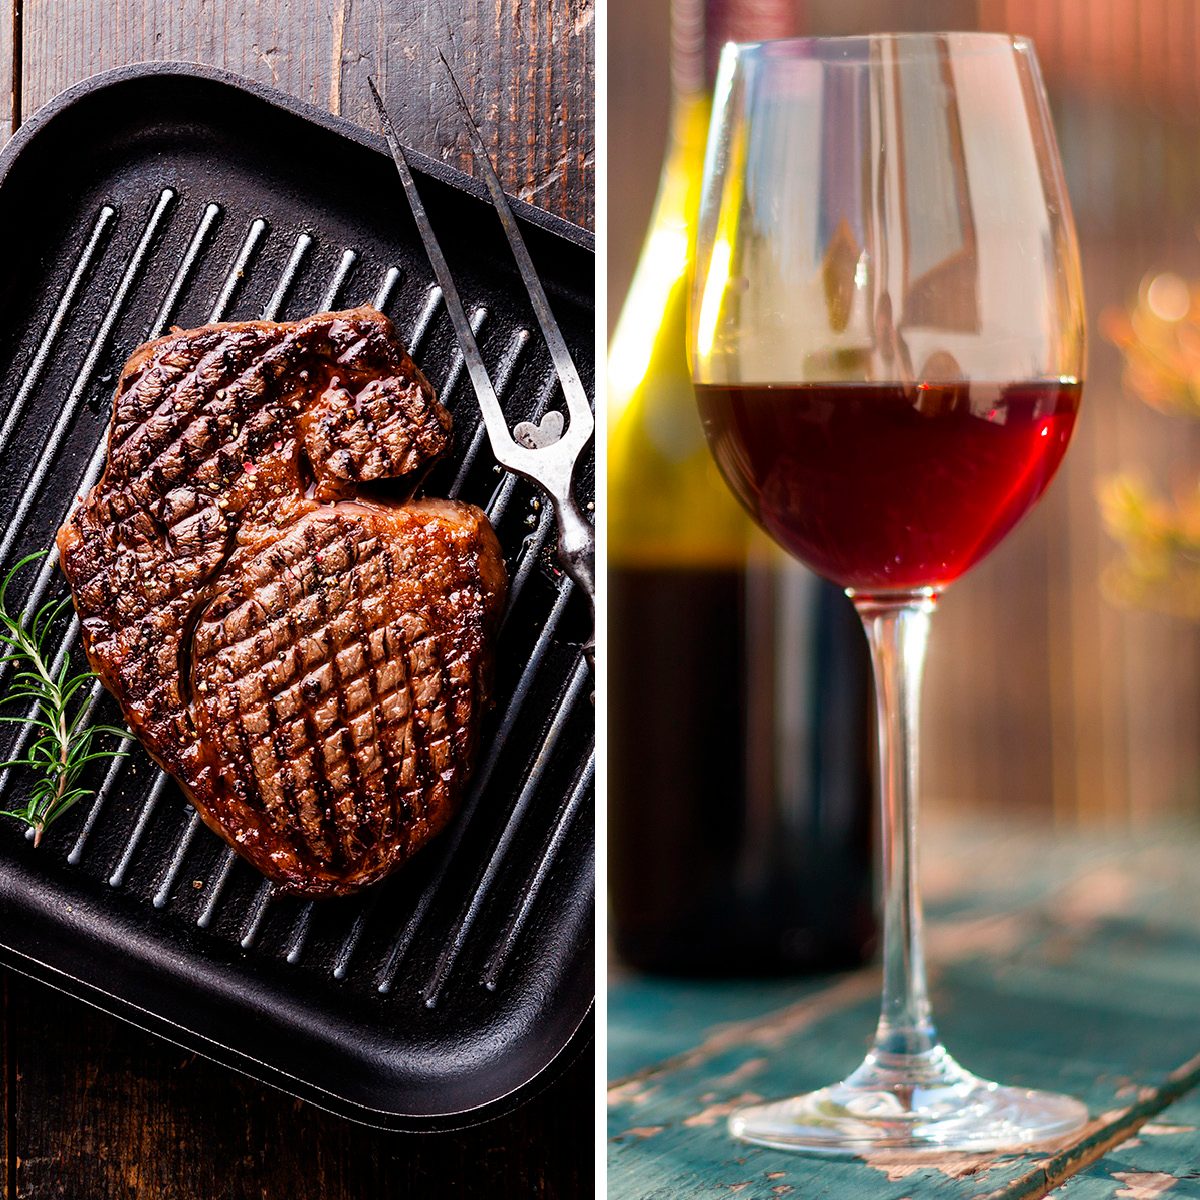 15 Easy Food and Wine Pairings for Your Next Party